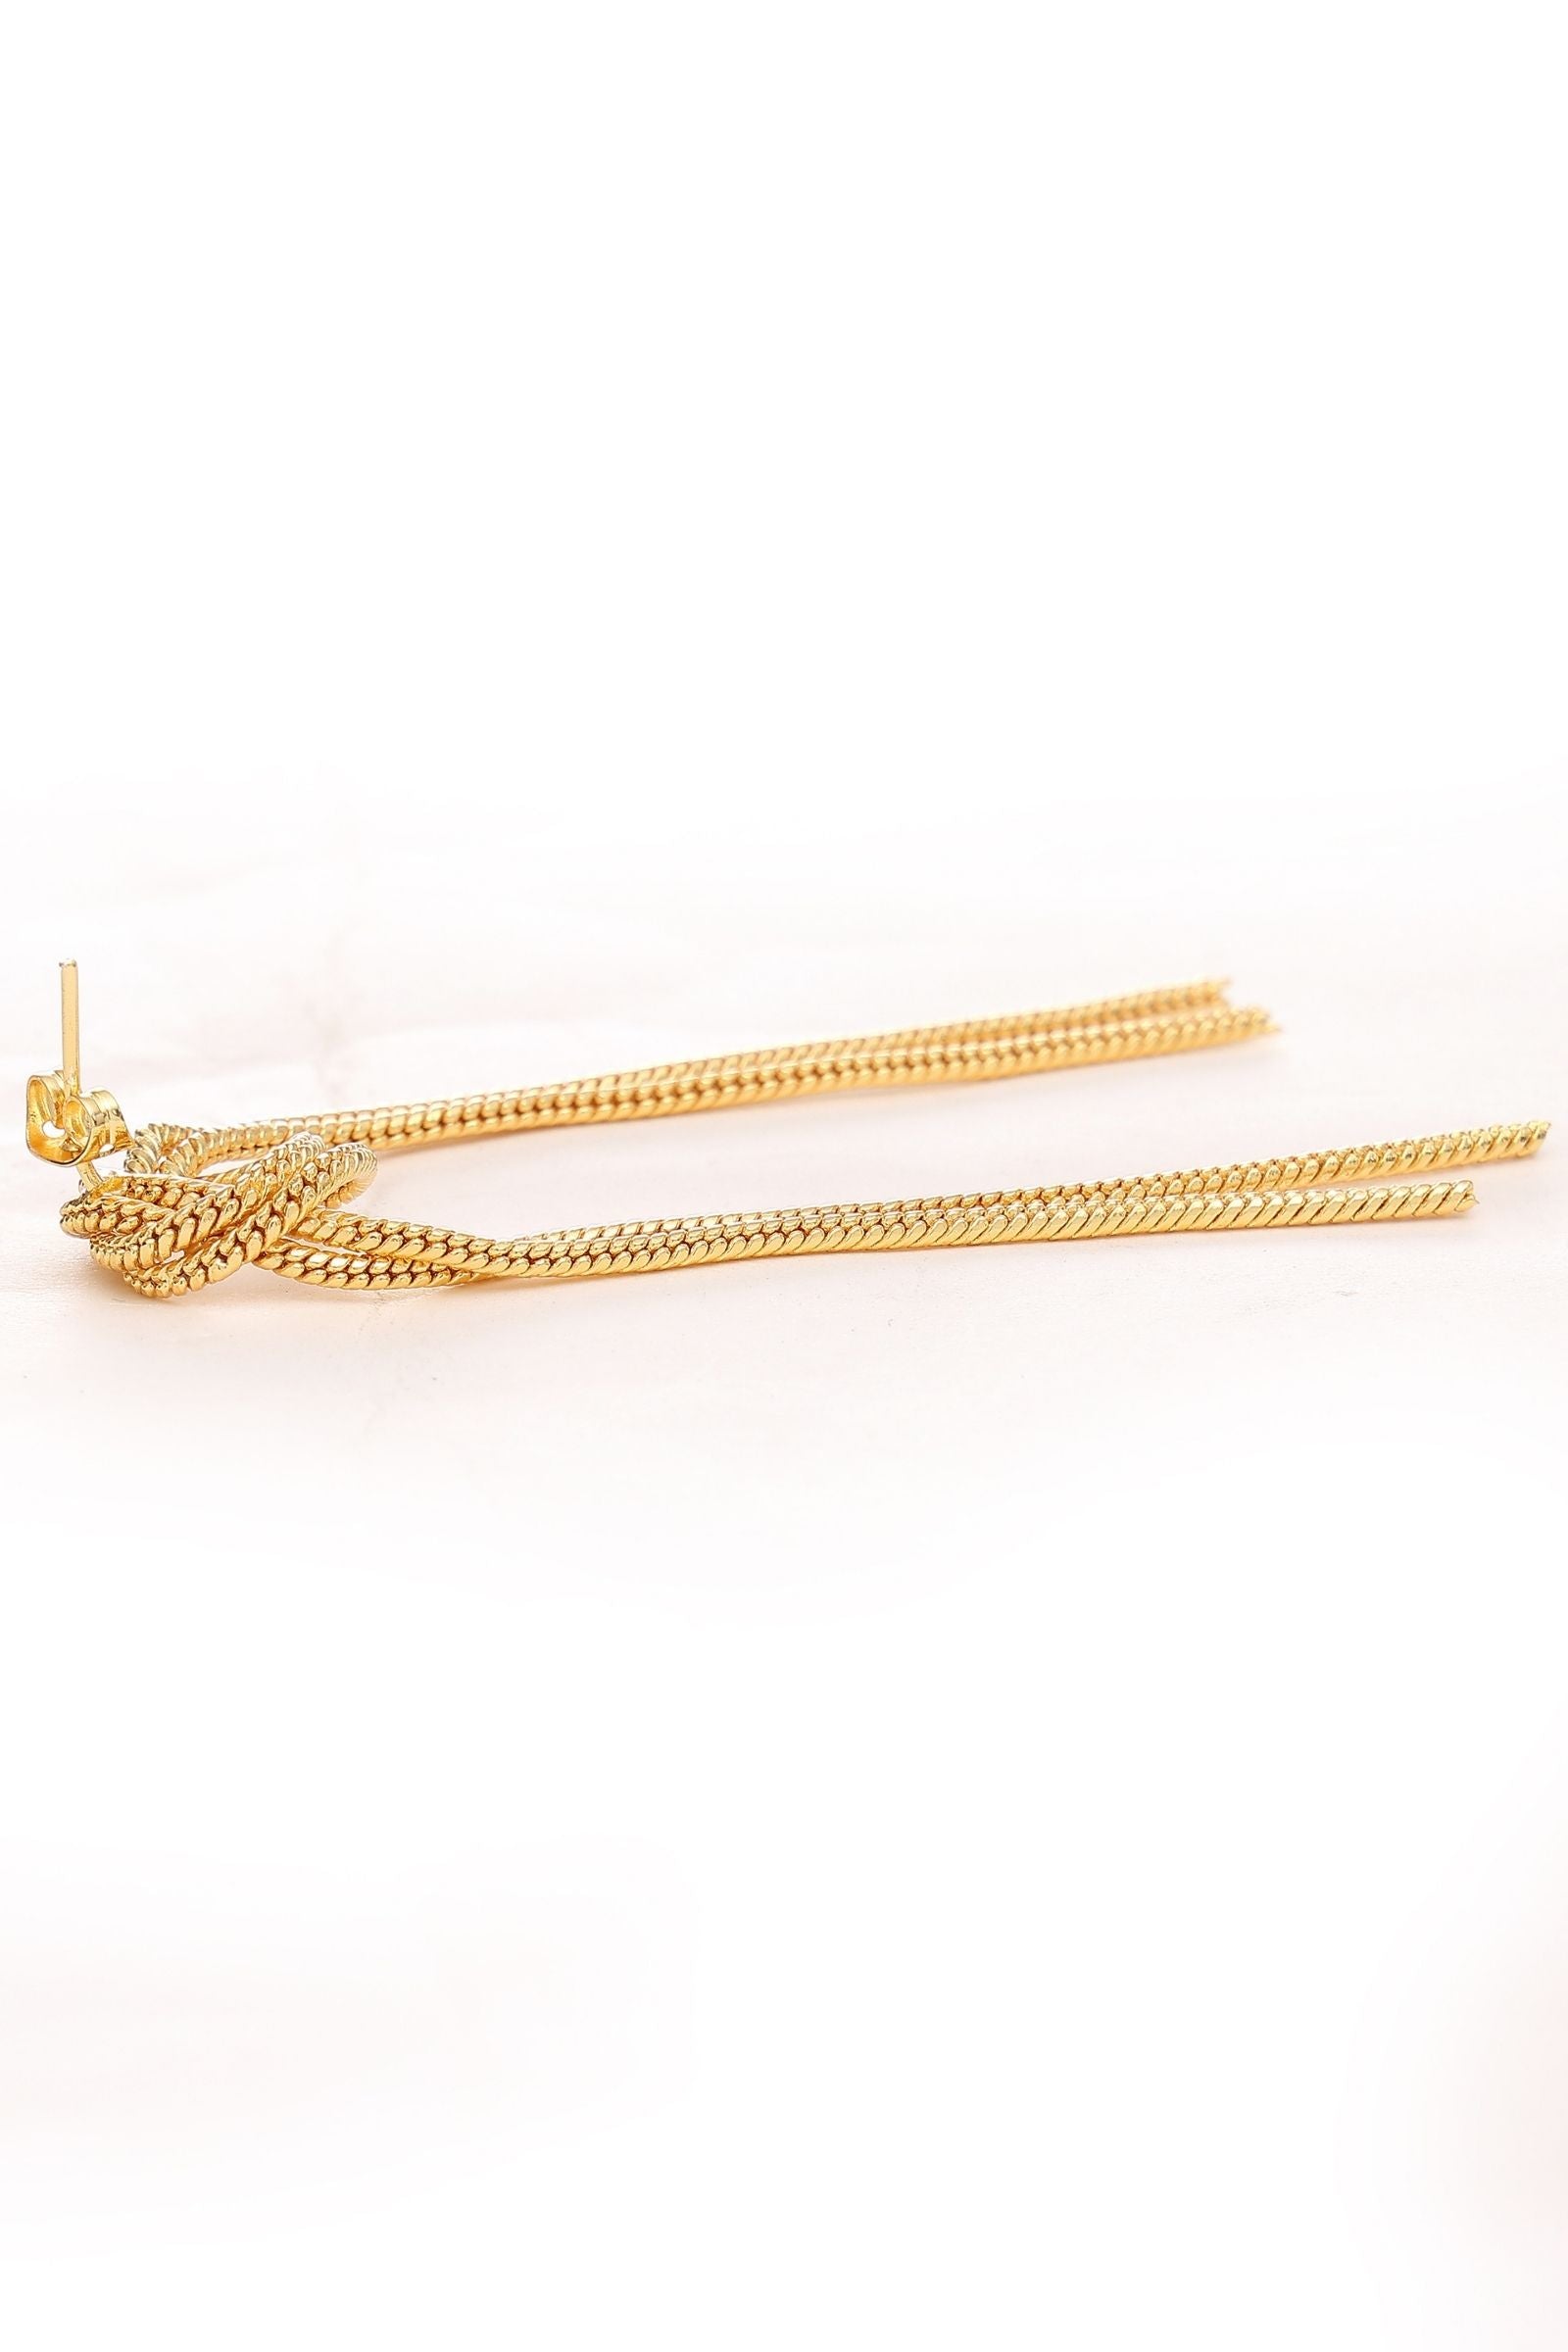 Knotted Chain Fringe Drop Earrings